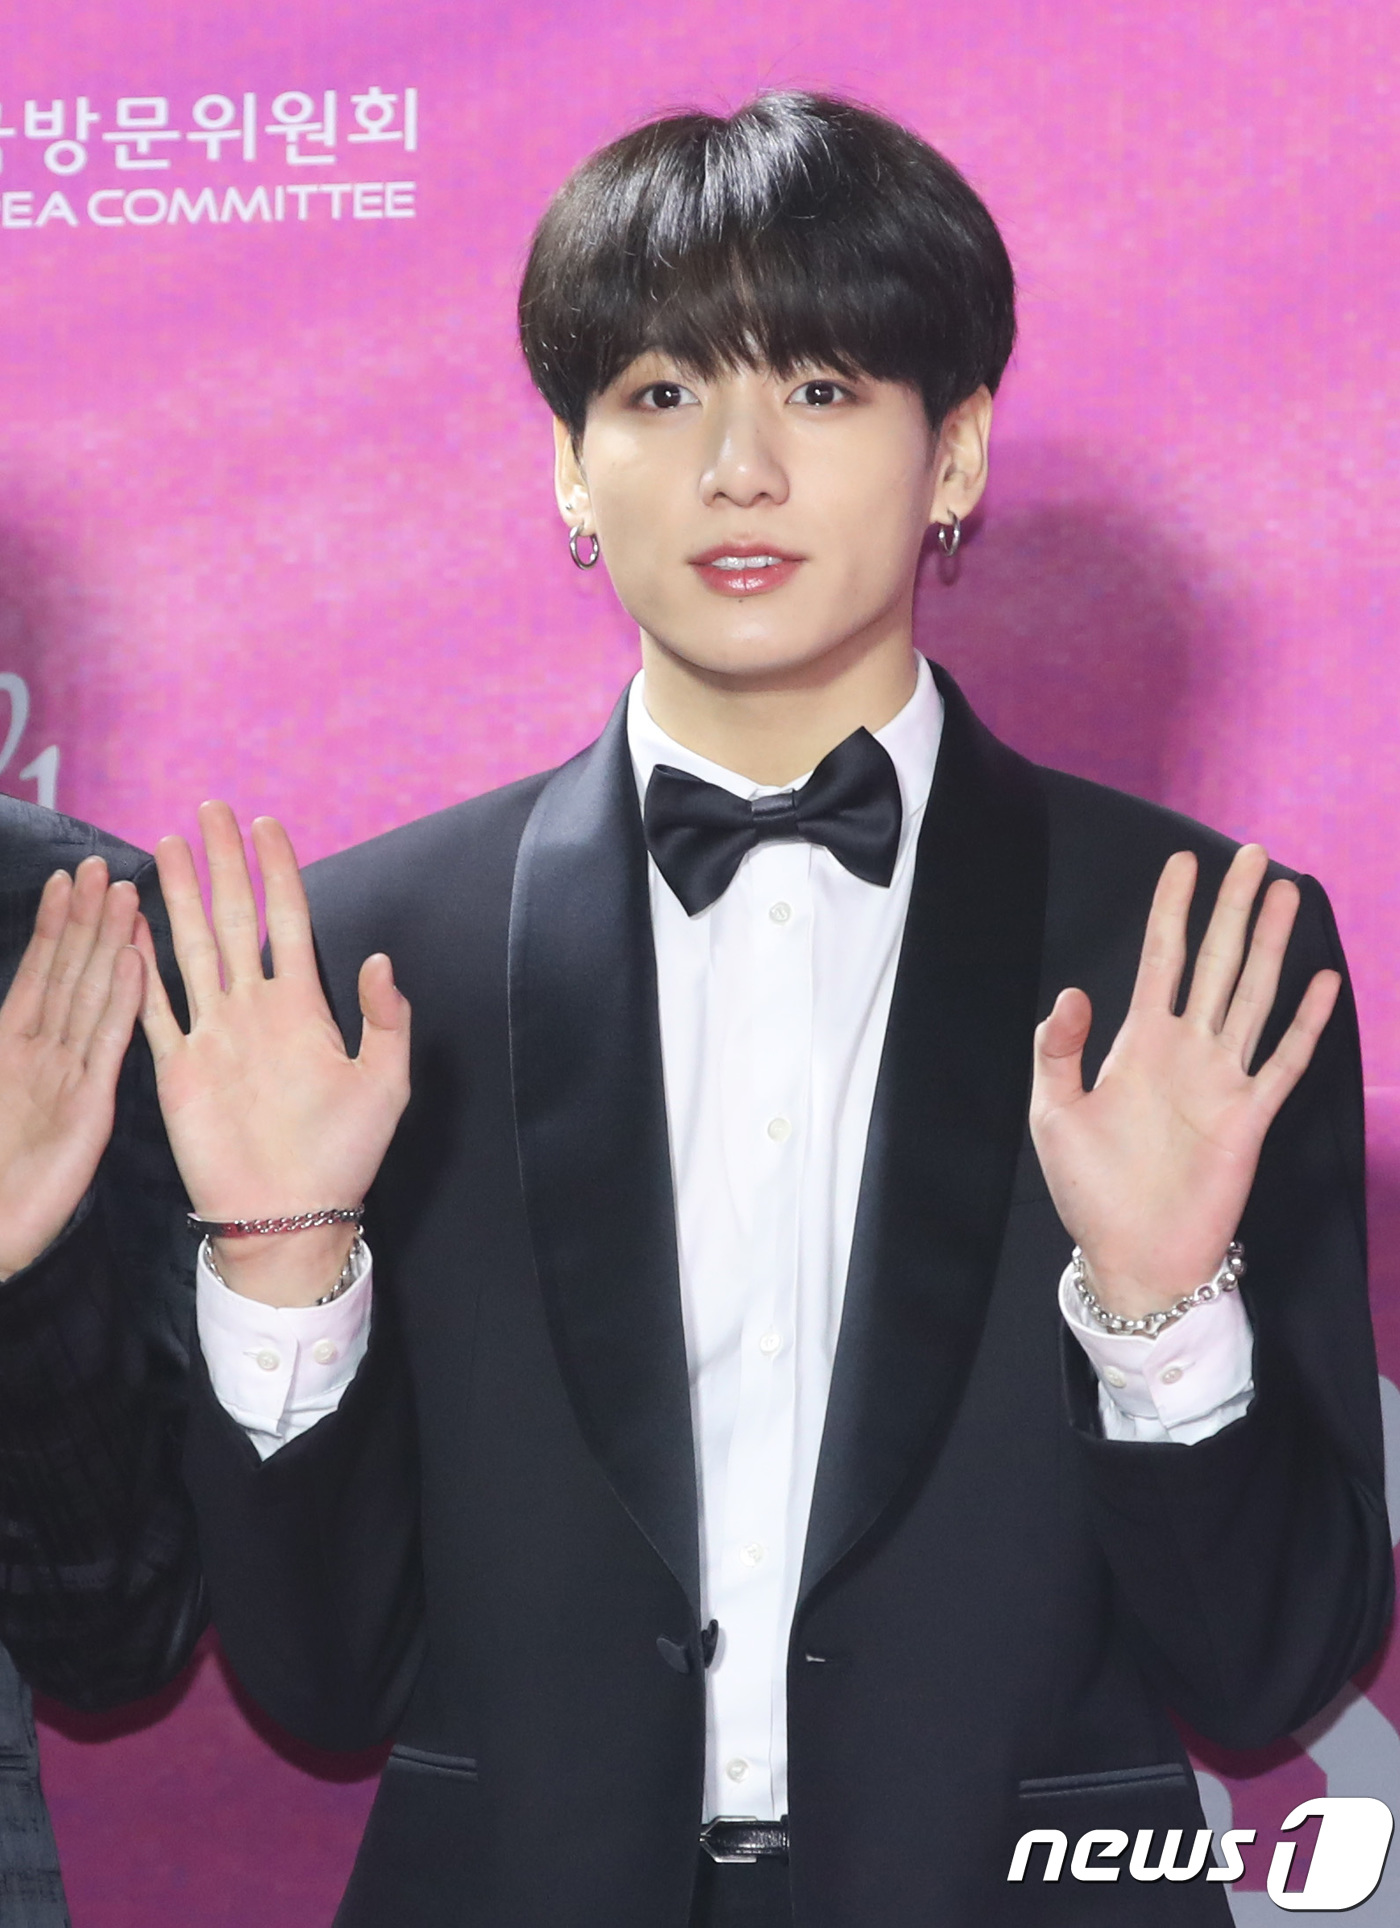 Seoul: = BTS (BTS) Jung Kuk poses at the 28th High1 Seoul Song Awards red carpet event held at Gocheok Sky Dome in Guro-gu, Seoul on the 15th. 2019.1.15